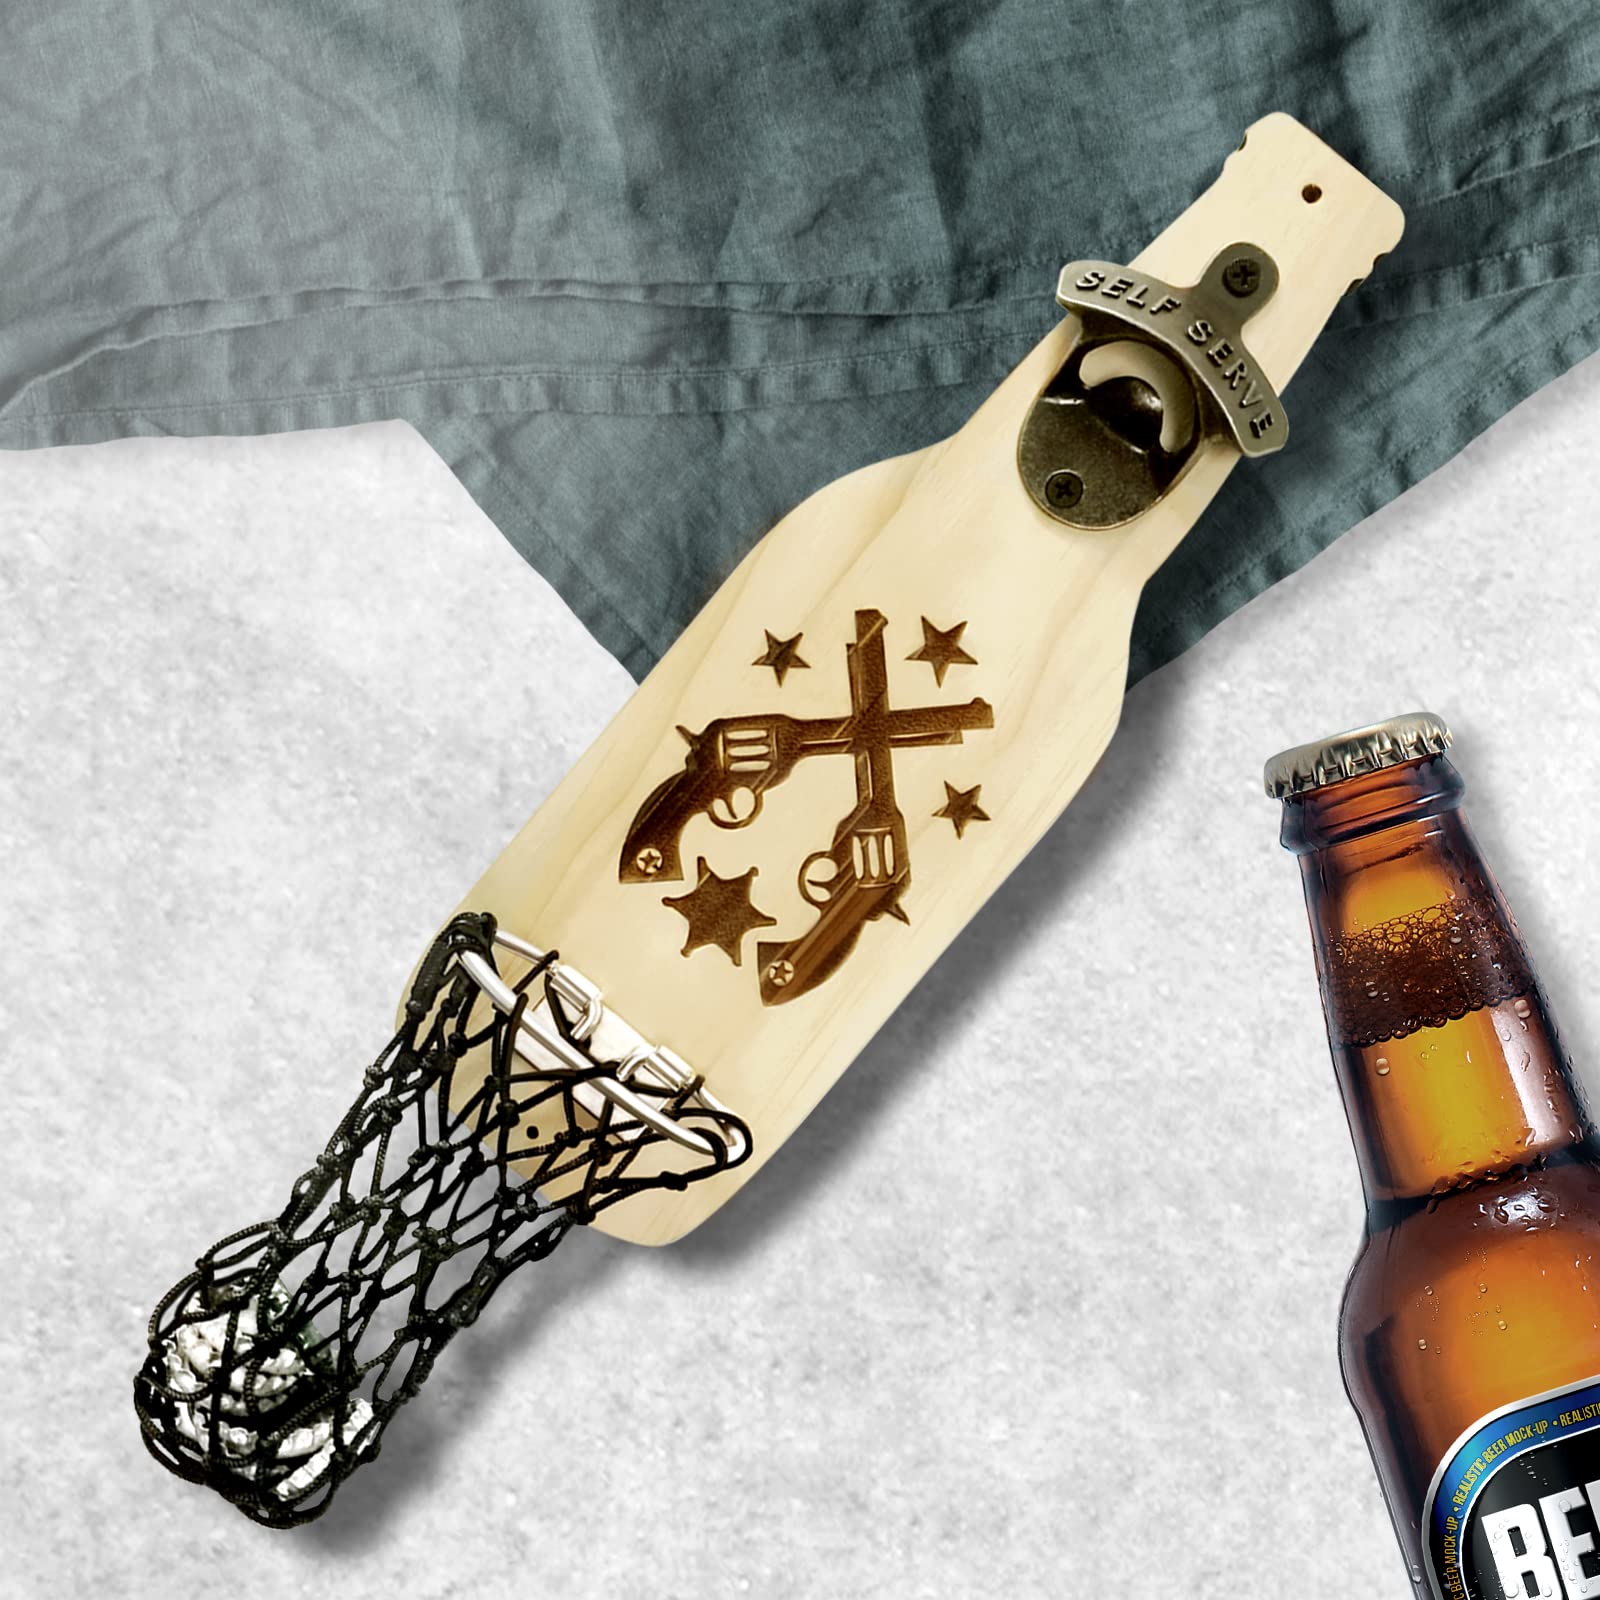 KingLive Bottle Opener - Funny Beer Bottle Opener with Wall Mounted Cap Catcher, Fun and Unique Gifts for Men, Dad, Father, Him, Perfect for Kitchen, Living Room, Bedroom, Outdoor, and Bar Decor